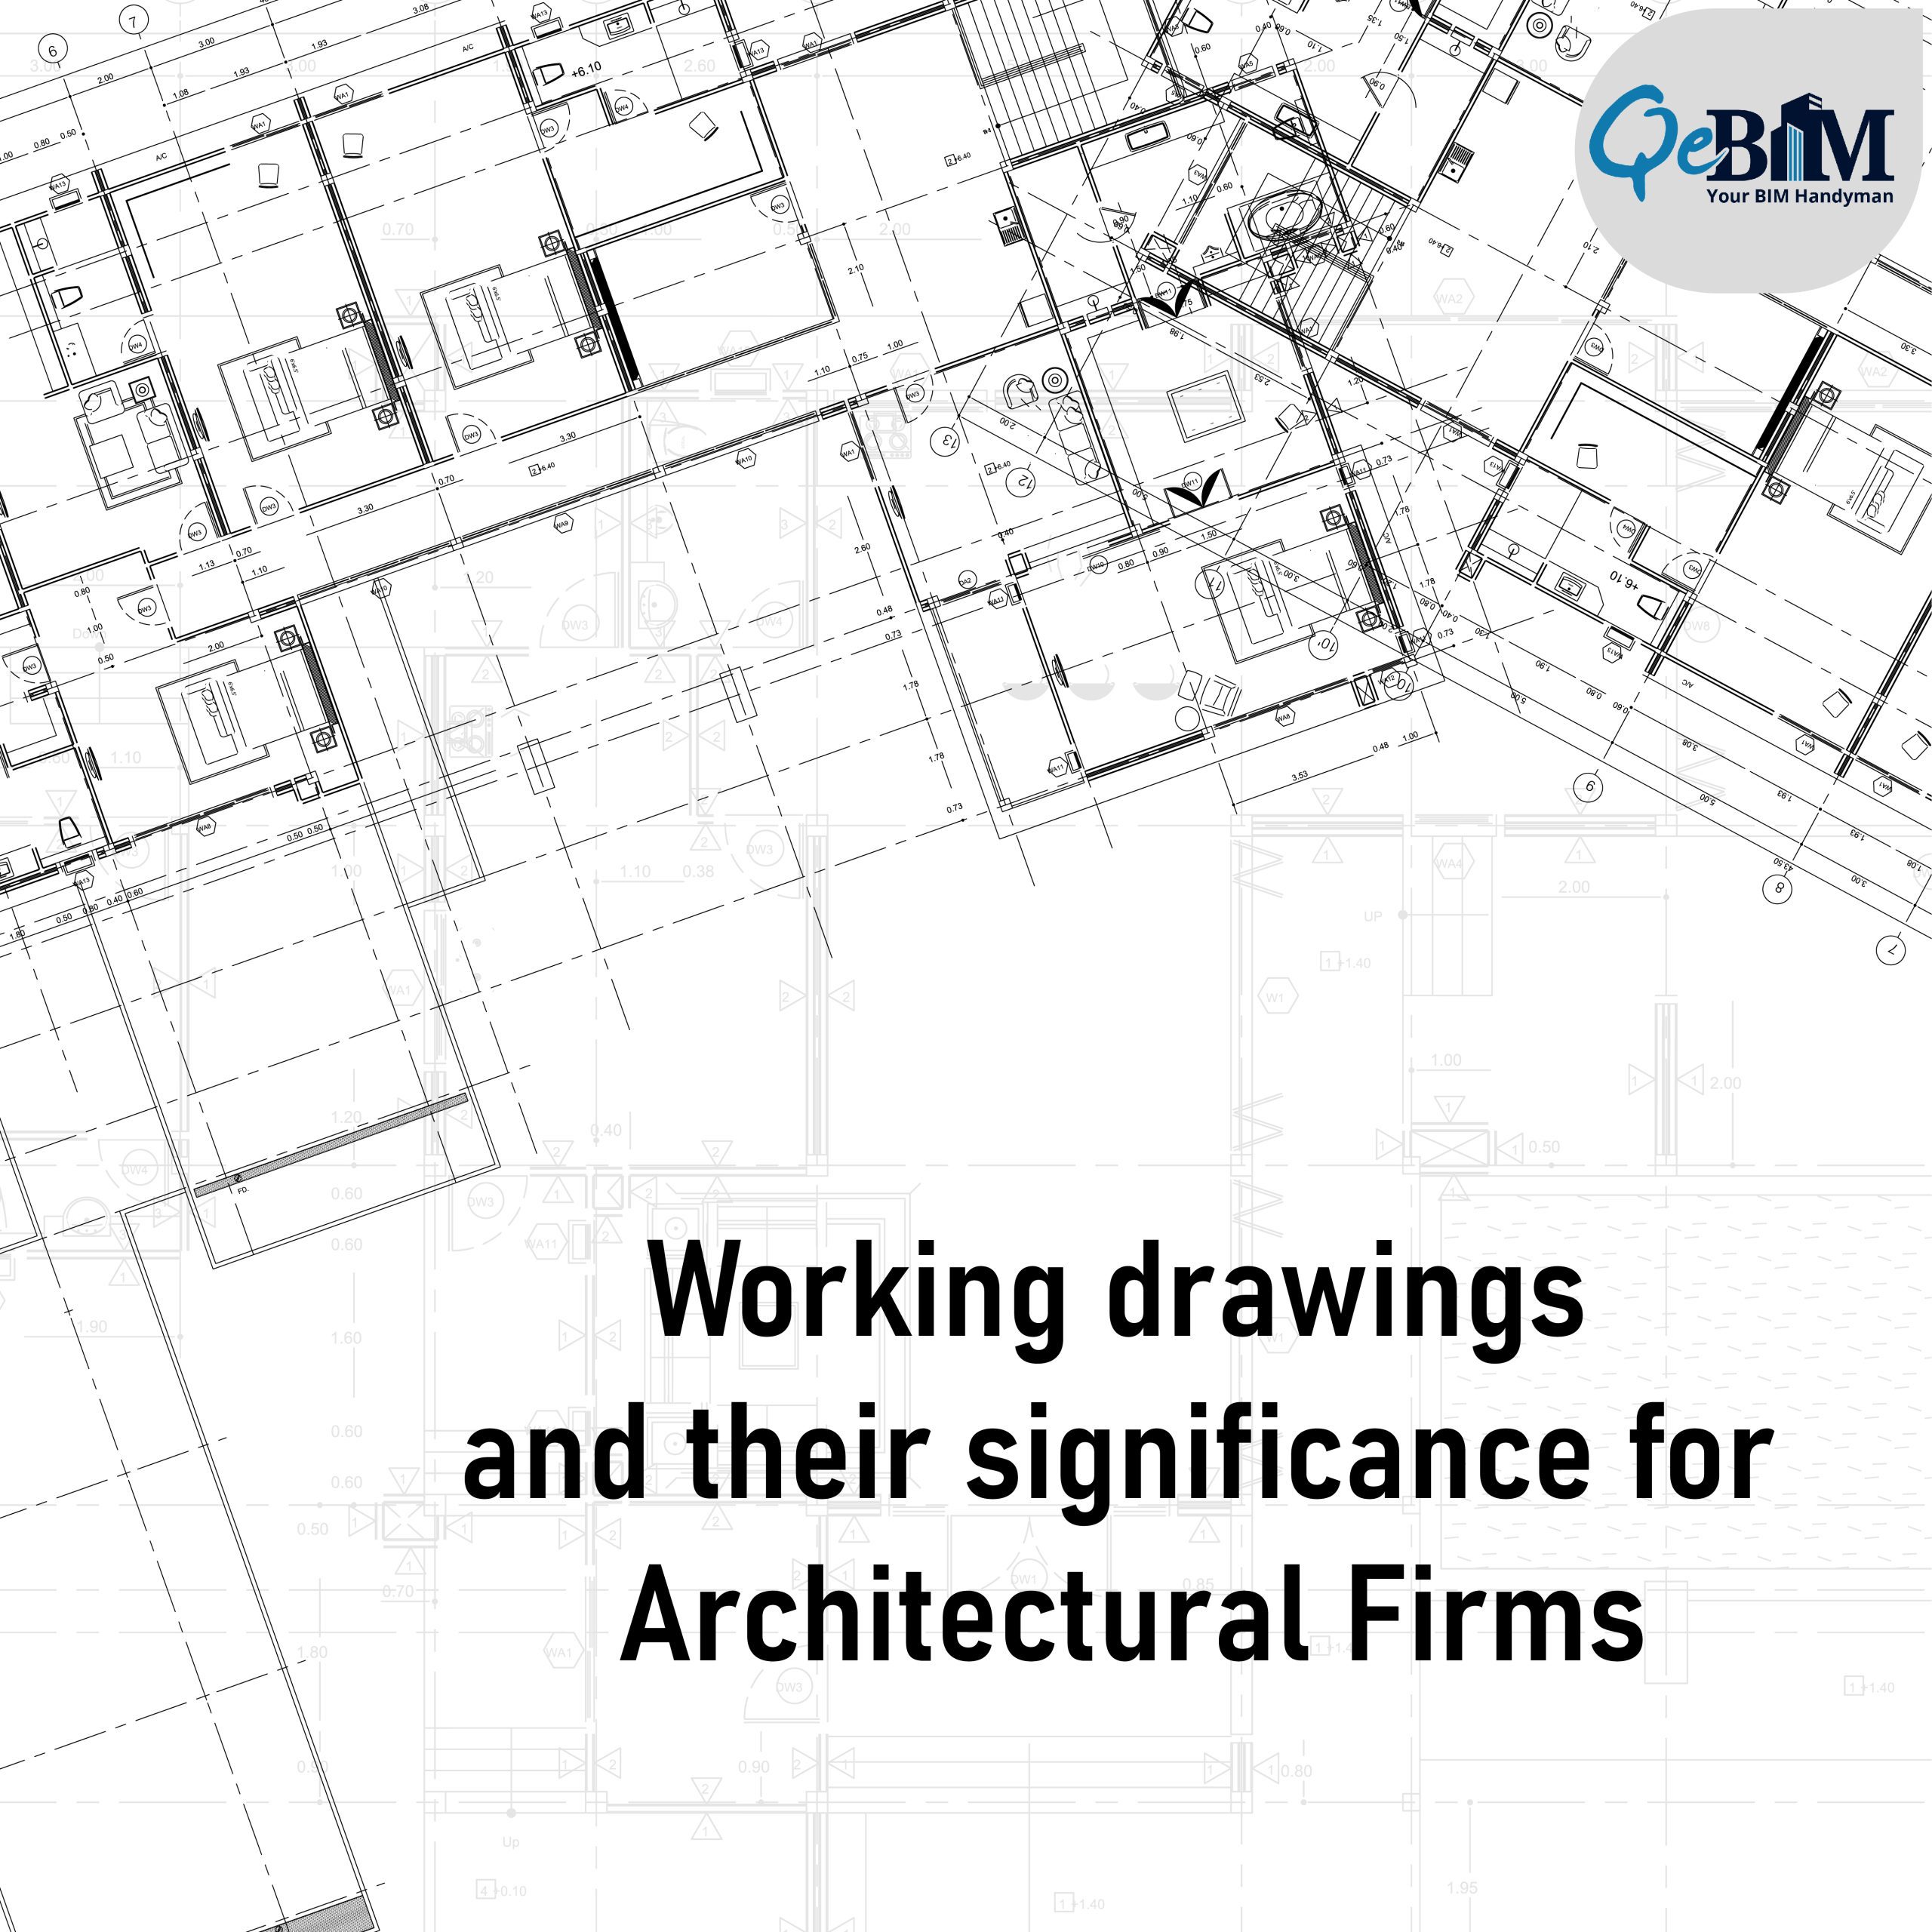 Working drawings and their significance for Architectural Firms